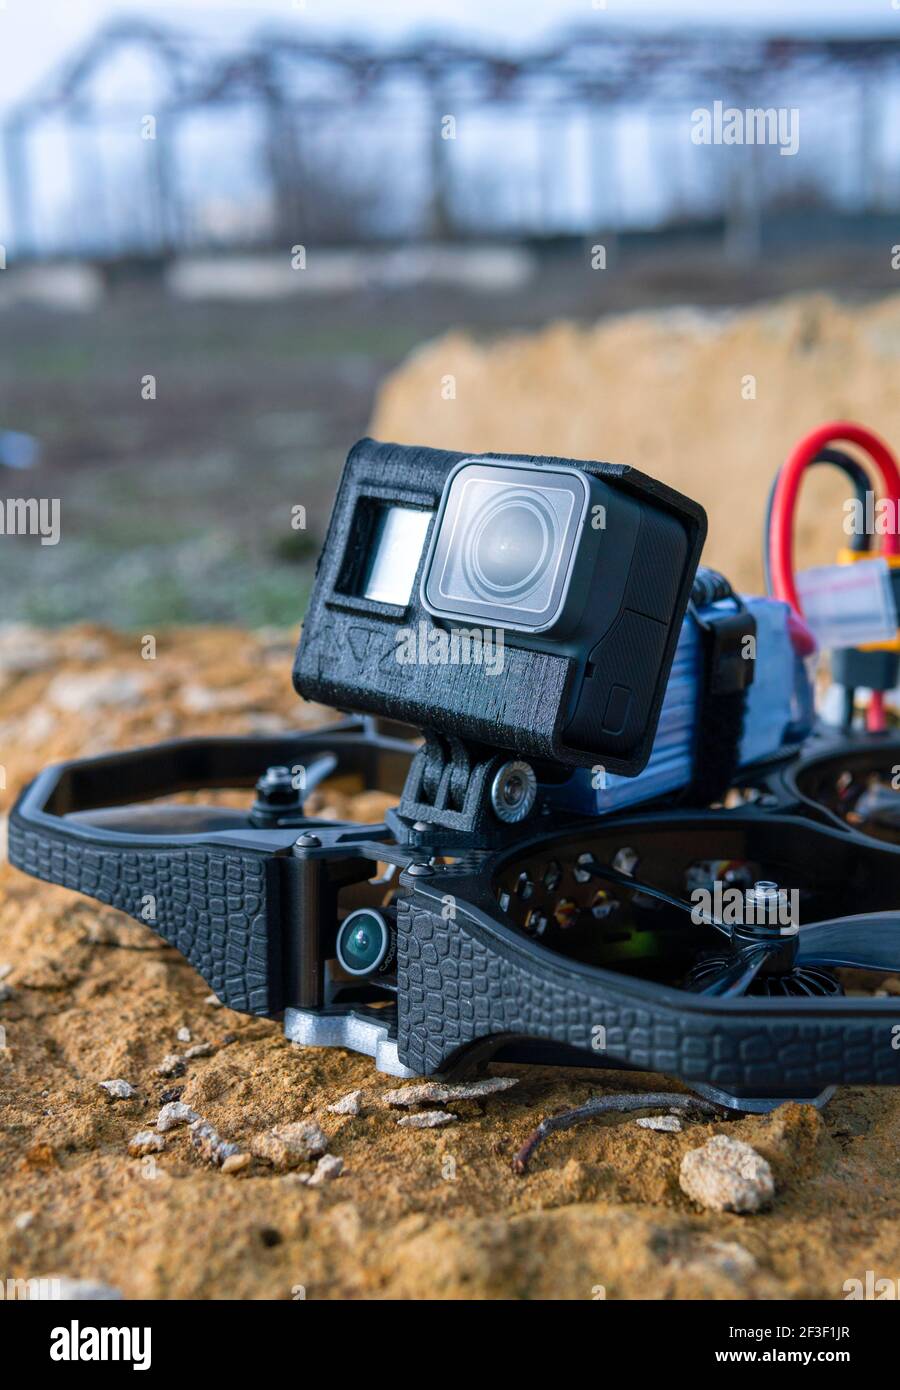 A Brand-New Modern Cinewhoop Iflight Protek 35 with GoPro Action Camera on  Board Outdoors in the Grass Stock Photo - Alamy